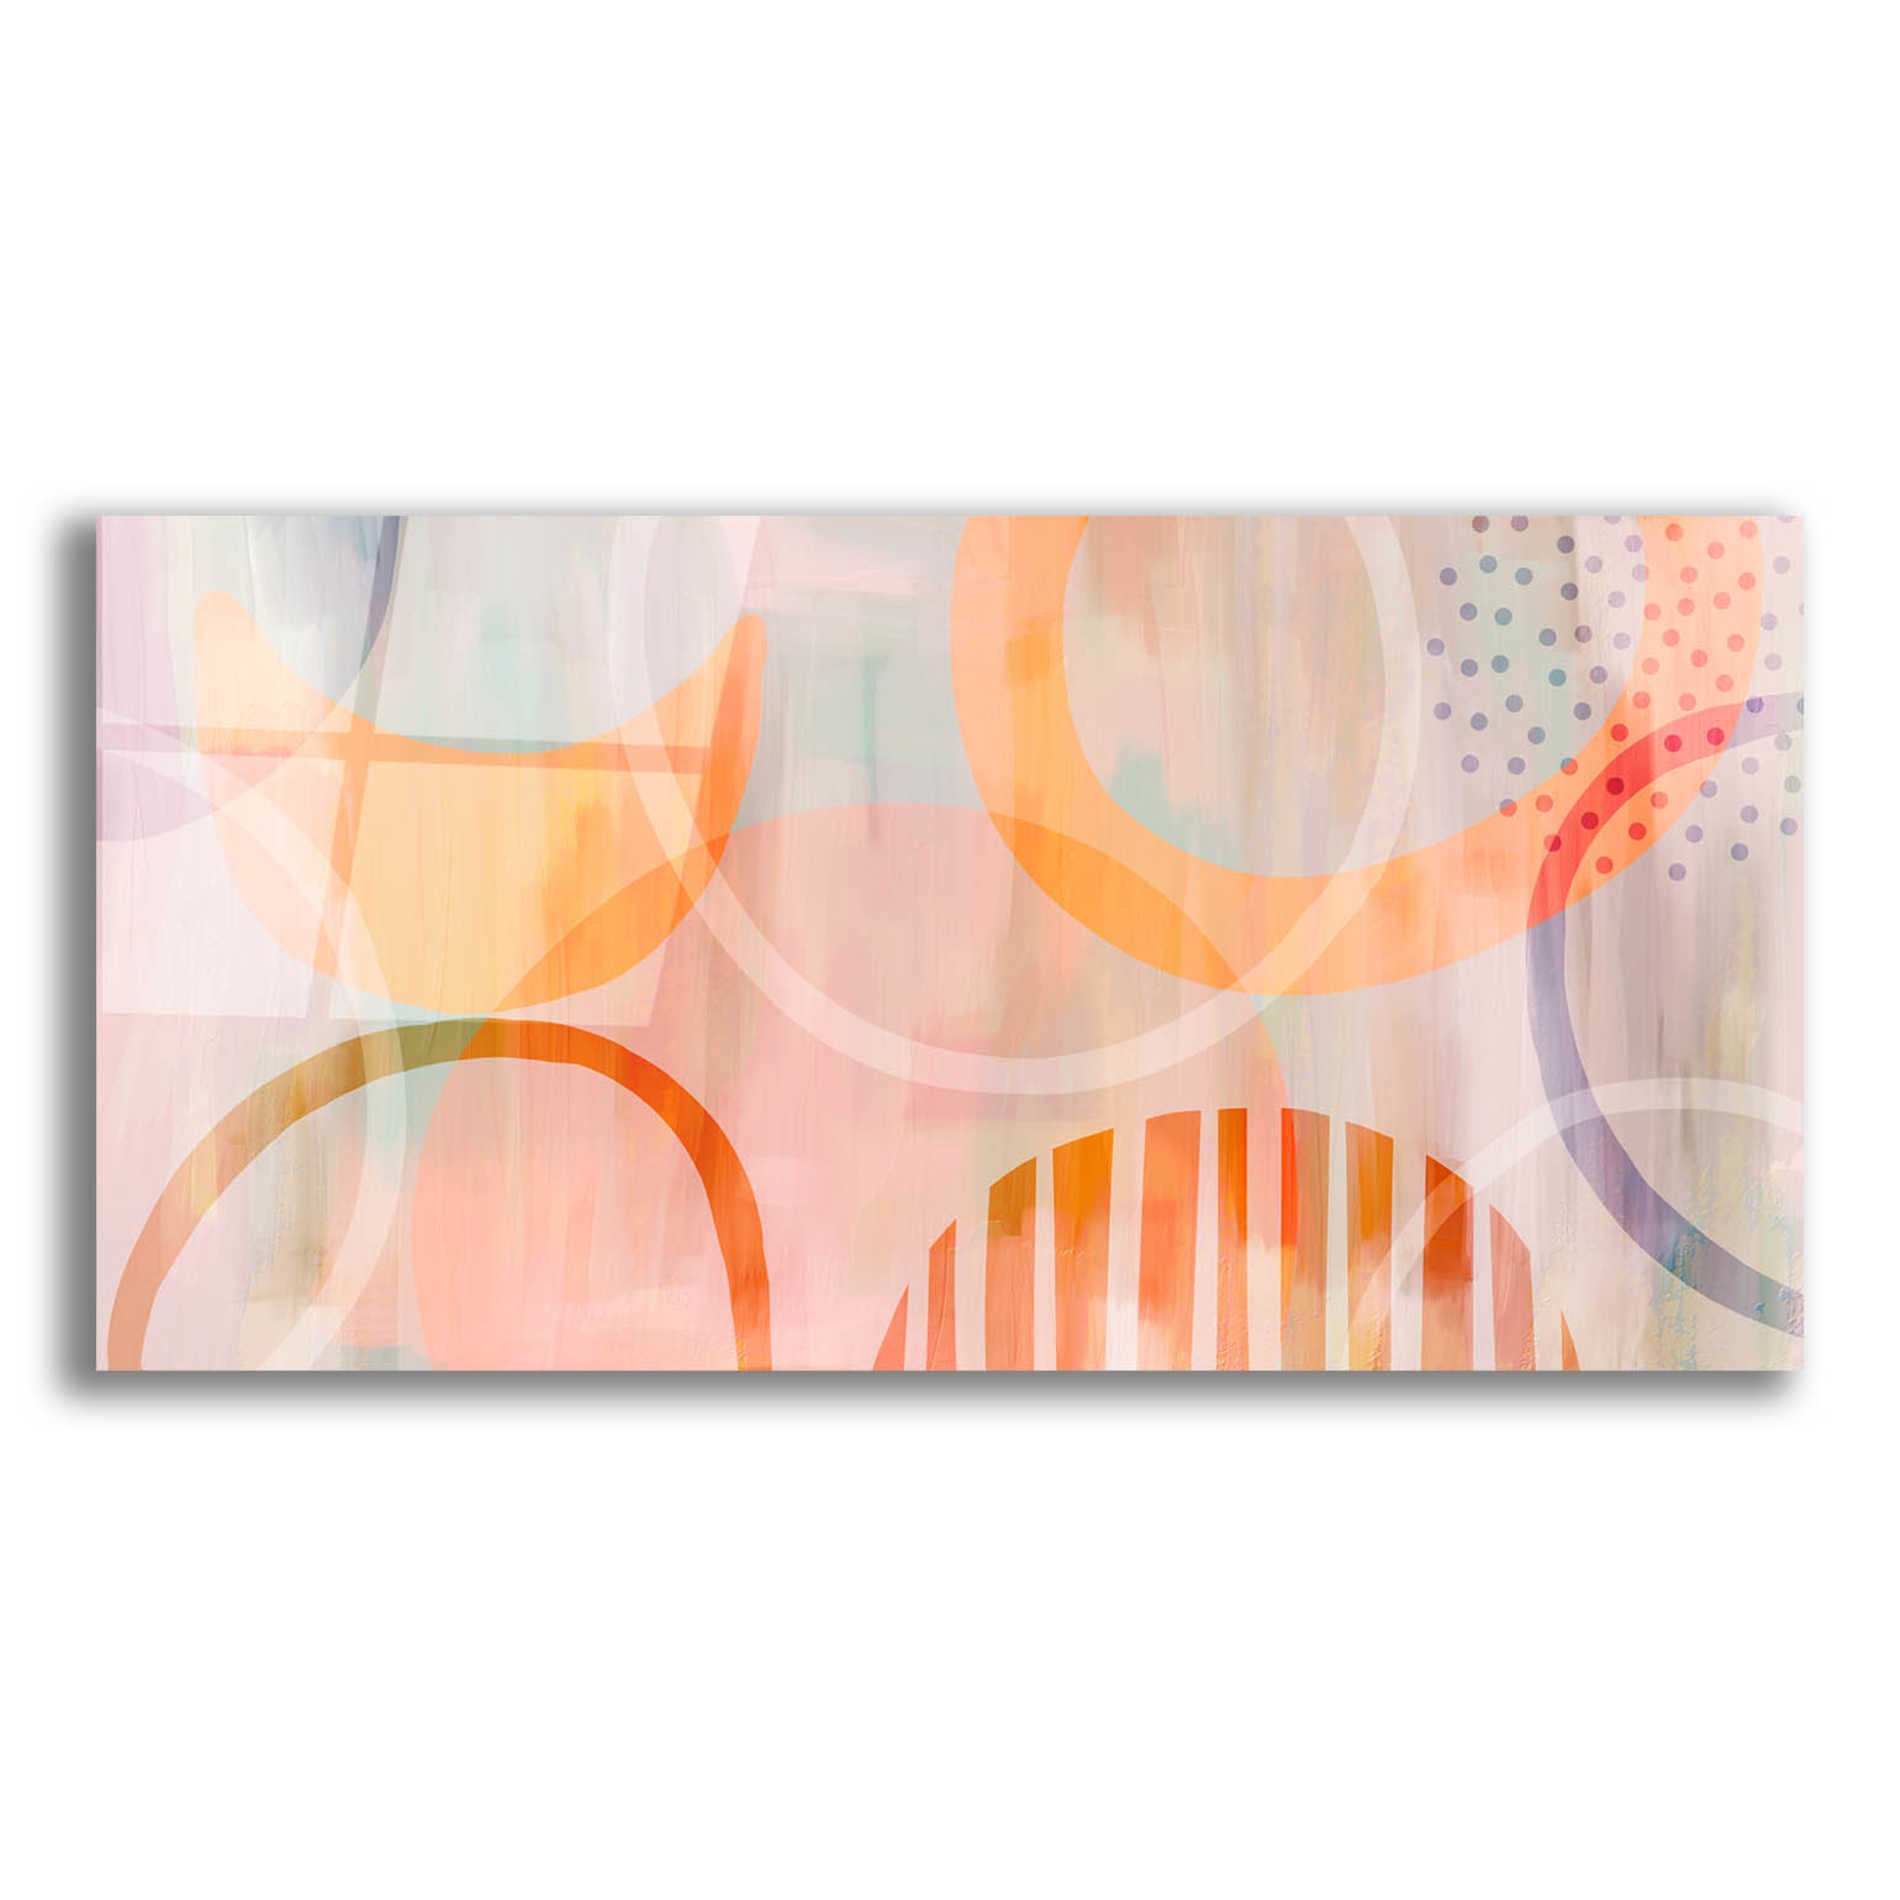 Epic Art 'Summer Tales' by Andrea Haase Acrylic Glass Wall Art,24x12